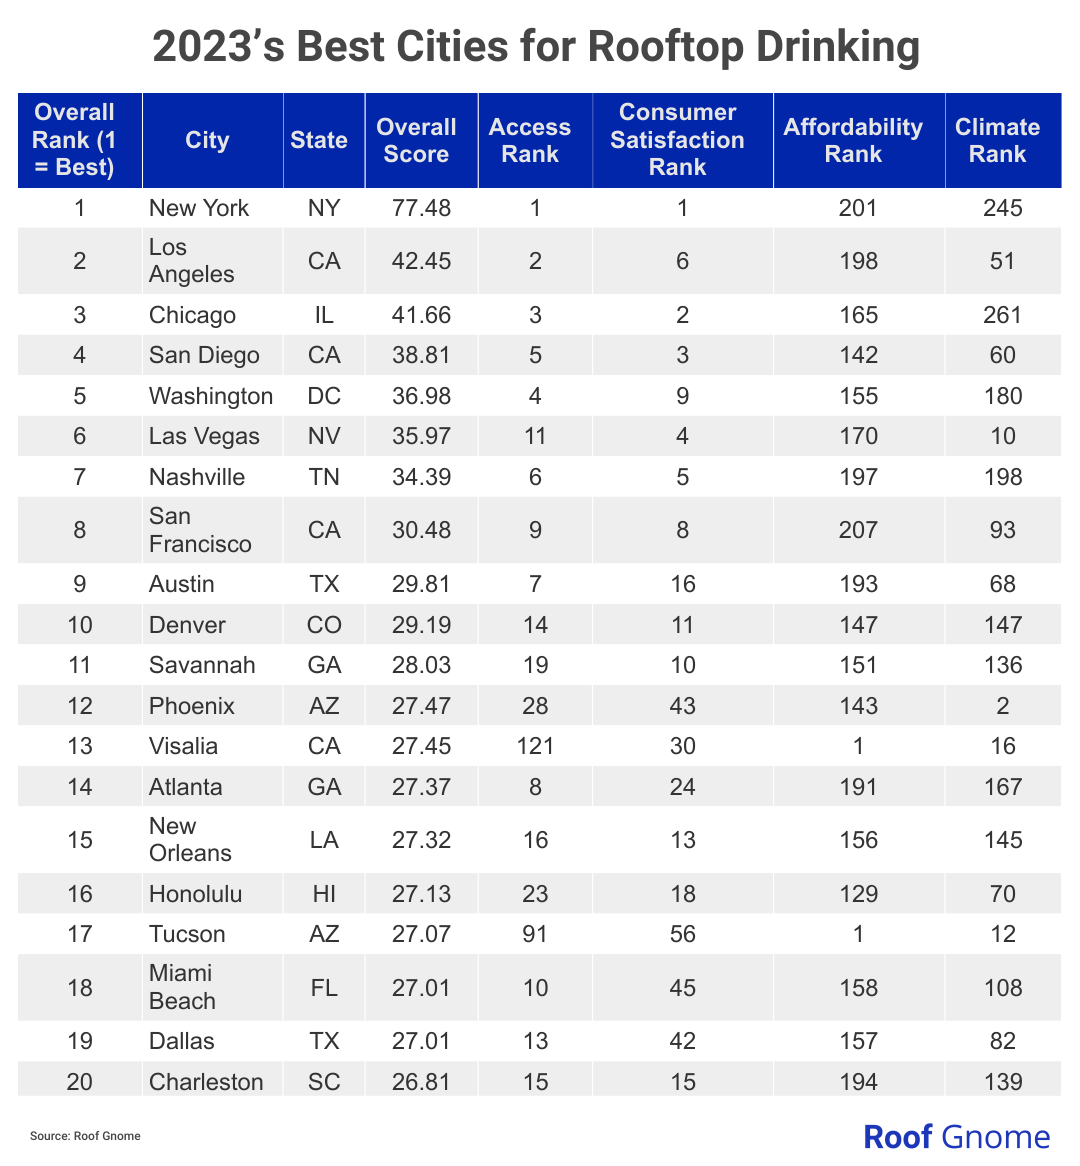 A table showing the top 20 U.S. cities for rooftop bars and lounges.